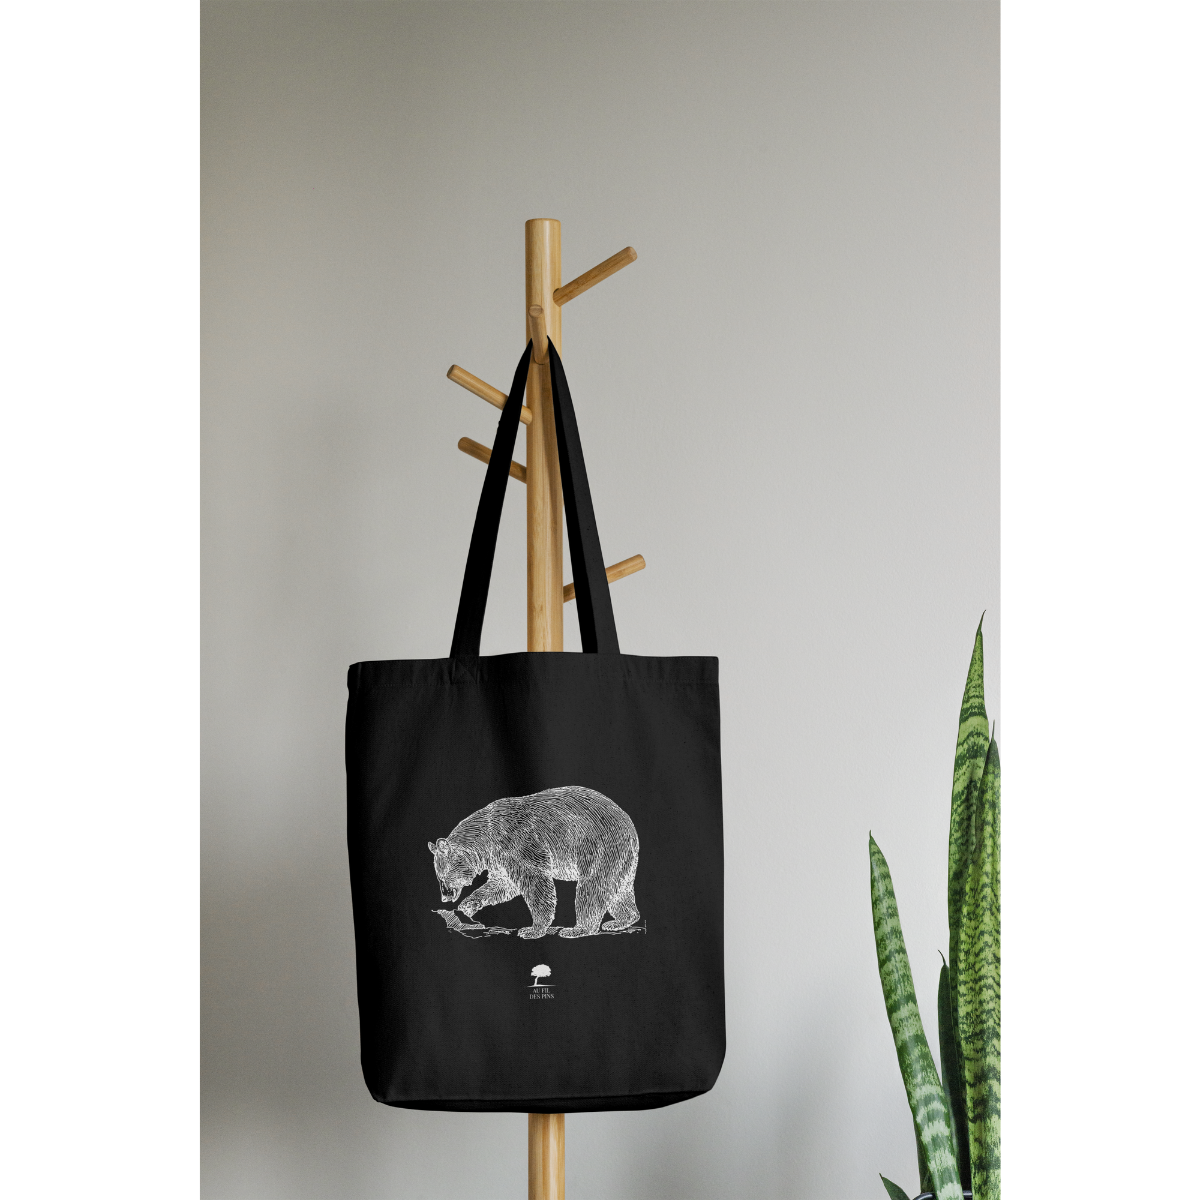 Tote bag coton Ours